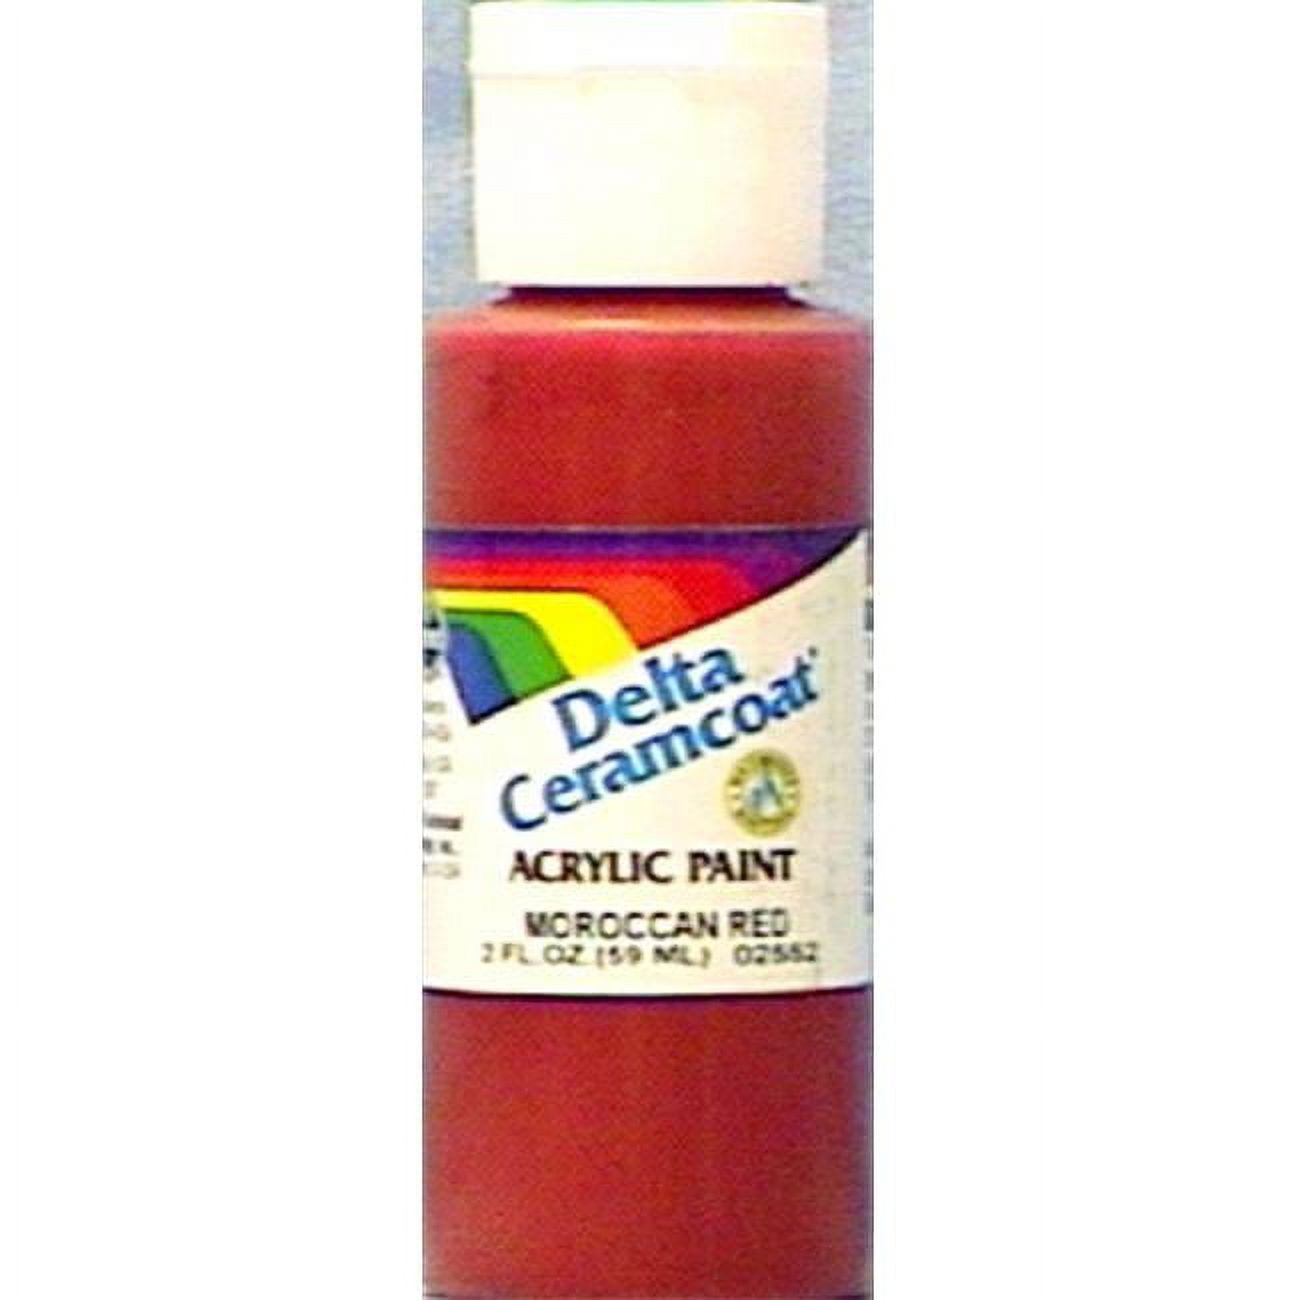 Delta Creative Ceramcoat Acrylic Paint in Assorted Colors (2 oz), 2678,  Deep Sea Coral